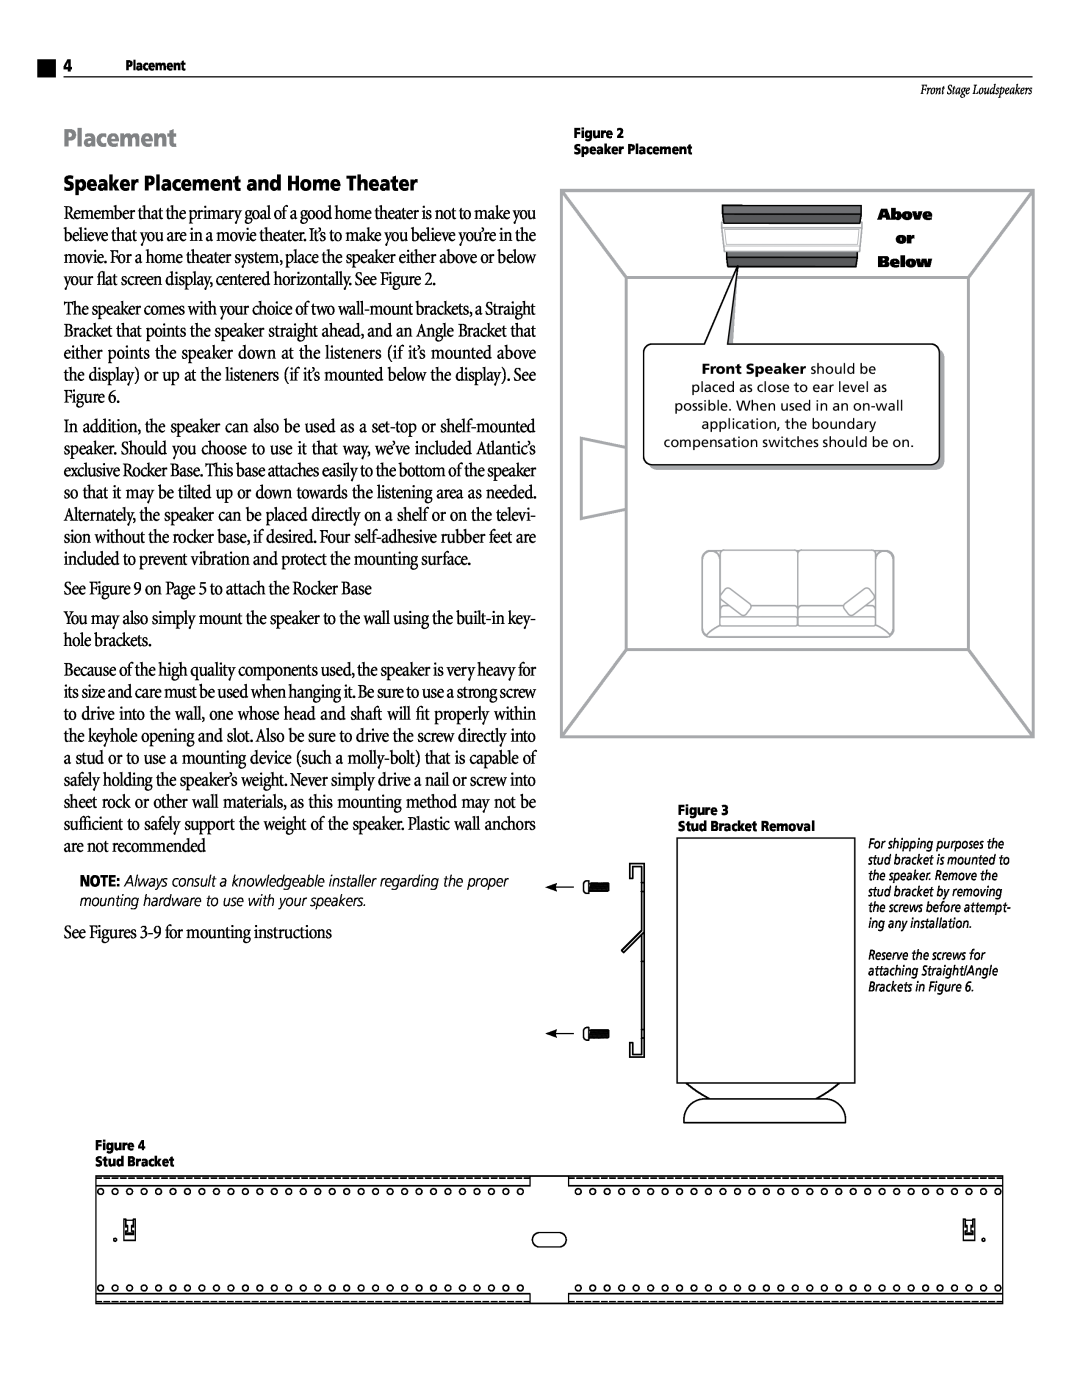 Atlantic Technology FS-4000 Speaker Placement and Home Theater, See on Page 5 to attach the Rocker Base, Bove, Elow 